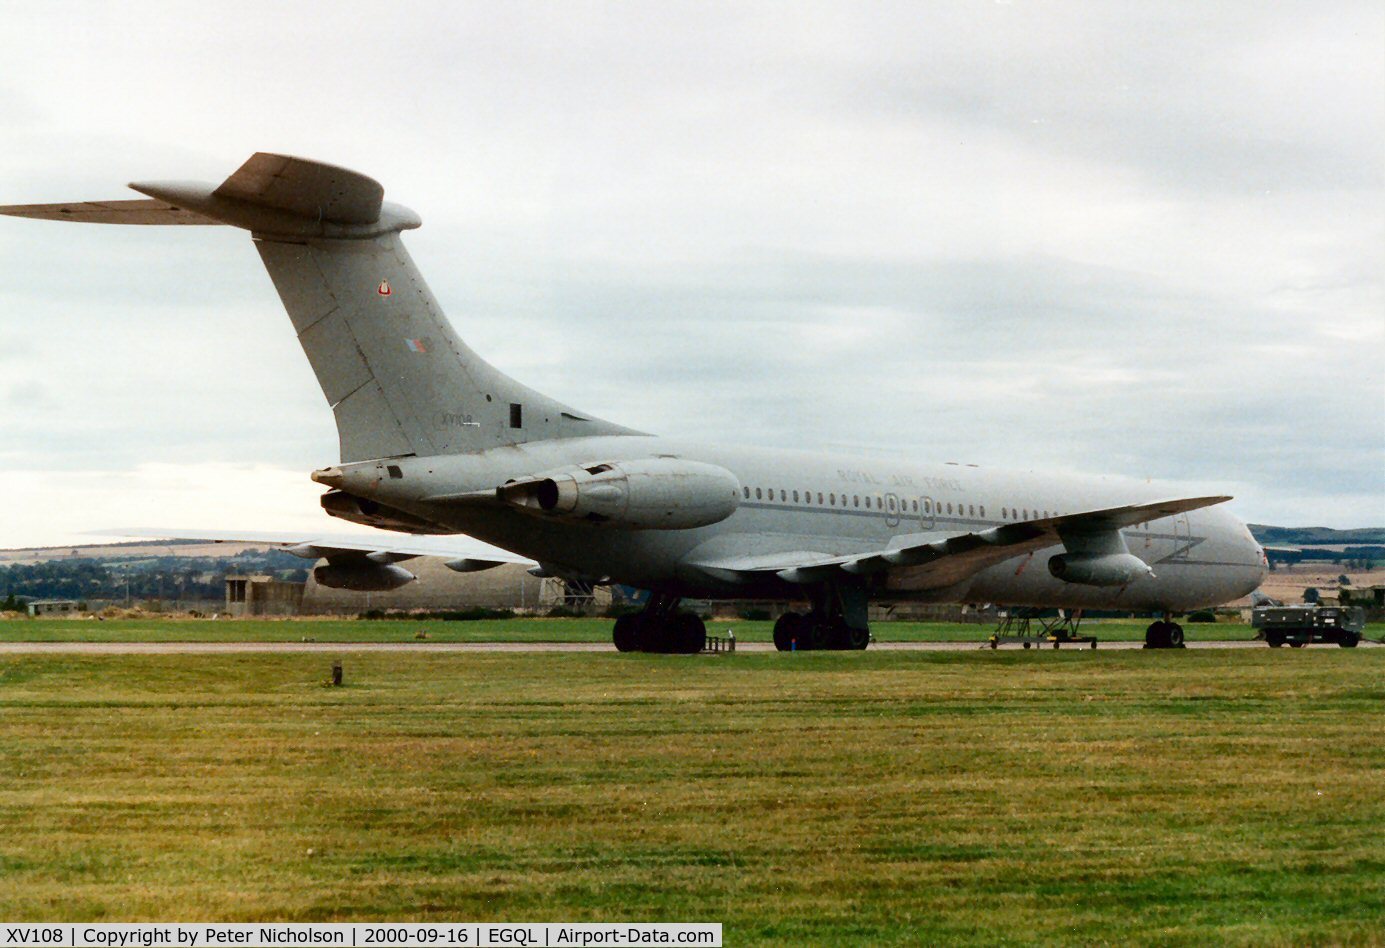 XV108, 1968 Vickers VC10 C.1K C/N 838, Another view of the 10 Squadron VC-10 C.1K, callsign Ascot 833, at the 2000 Leuchars Airshow.